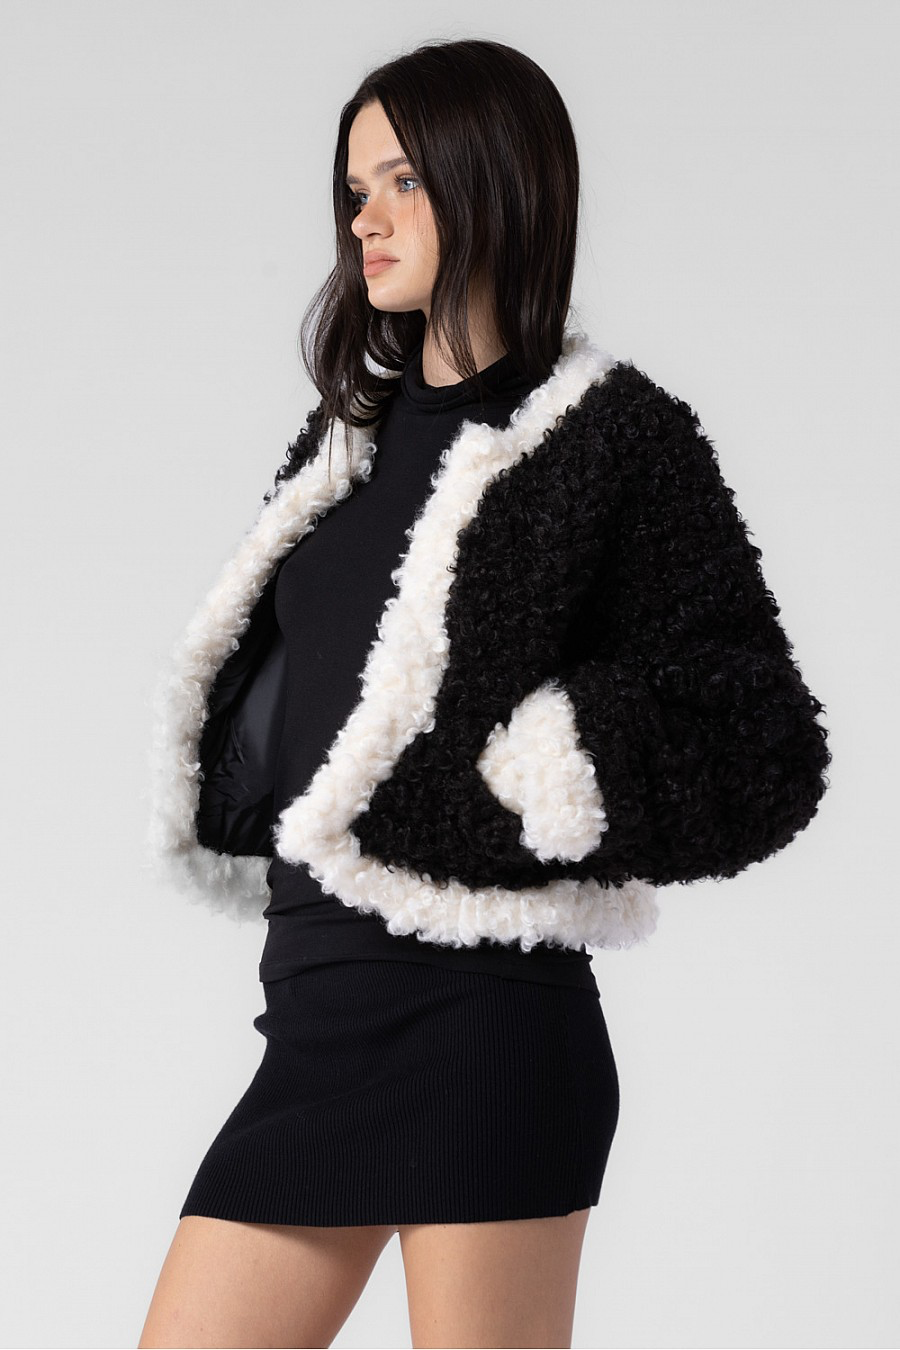 The model is wearing a cropped fluffy jacket with two front pockets. The jacket is black with white lining around the body and cuffs.